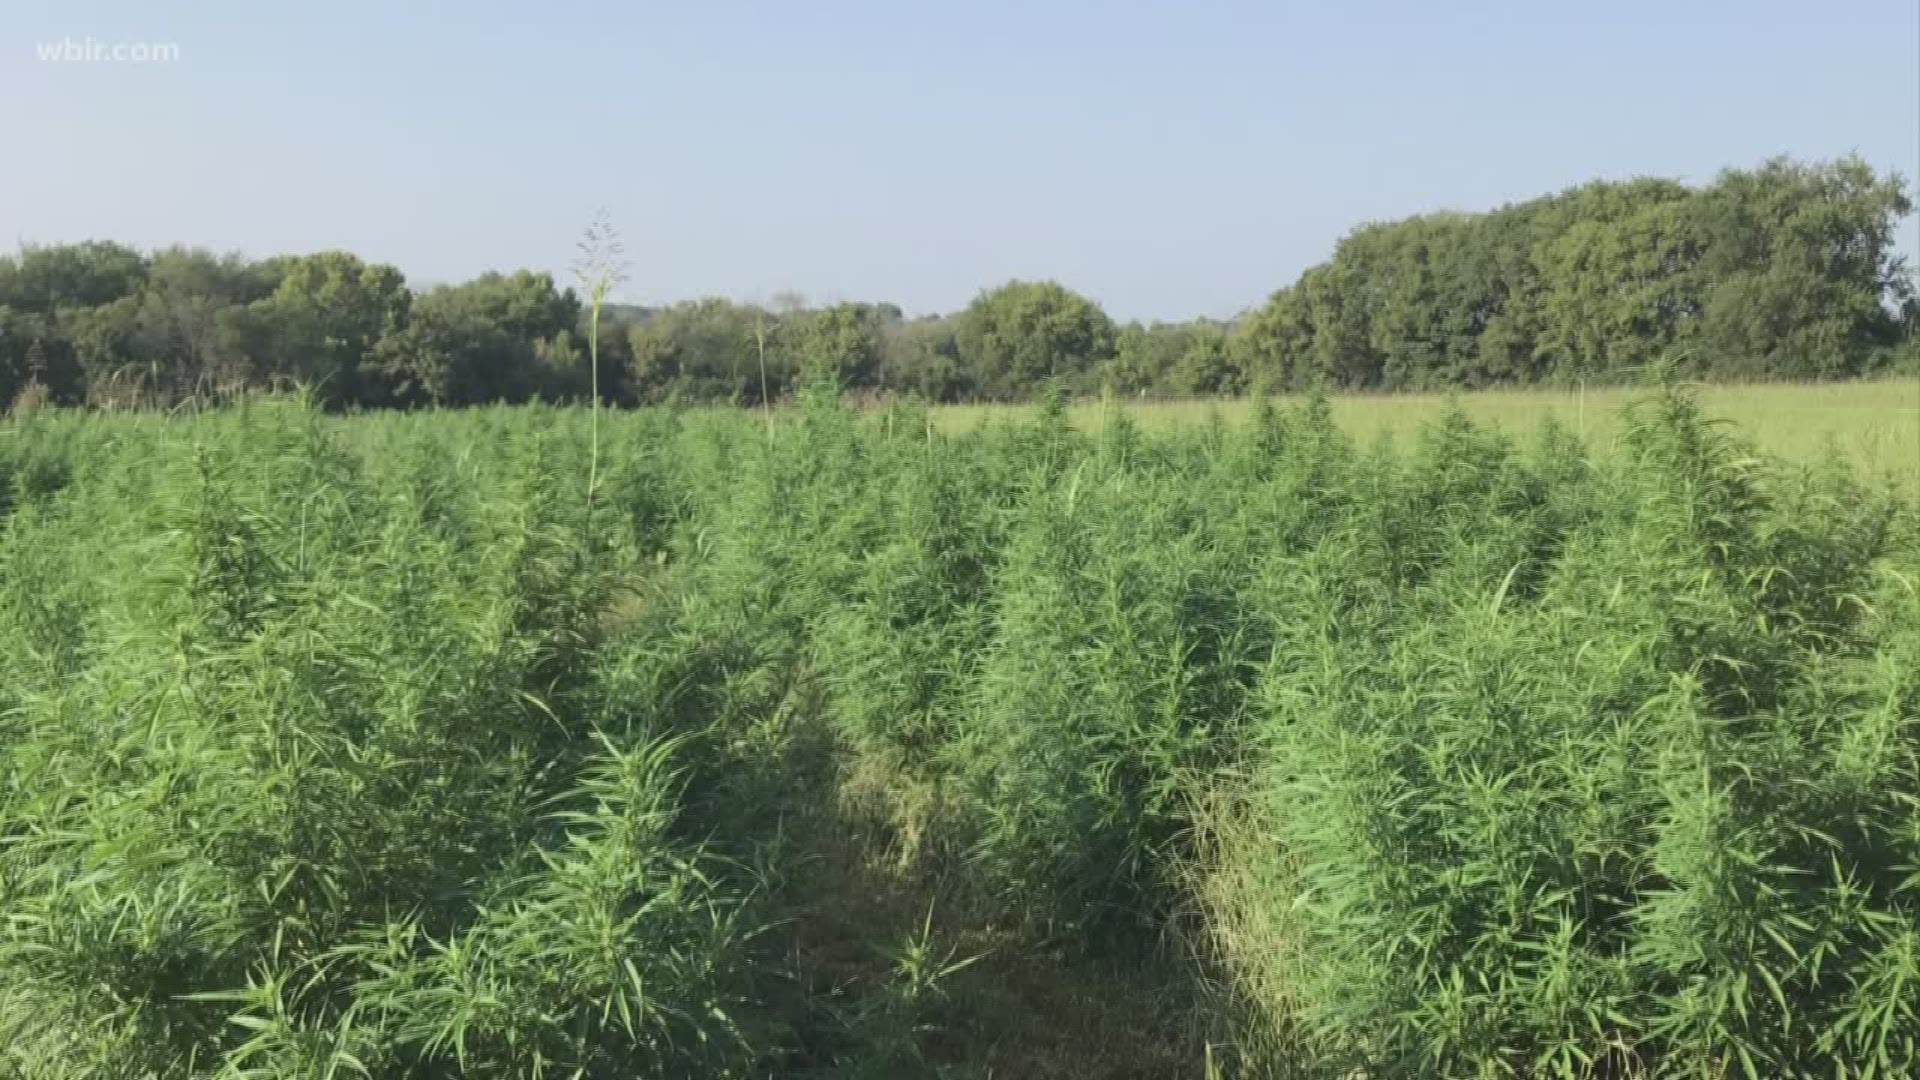 Thousands of people will soon find out if they can grow hemp in Tennessee